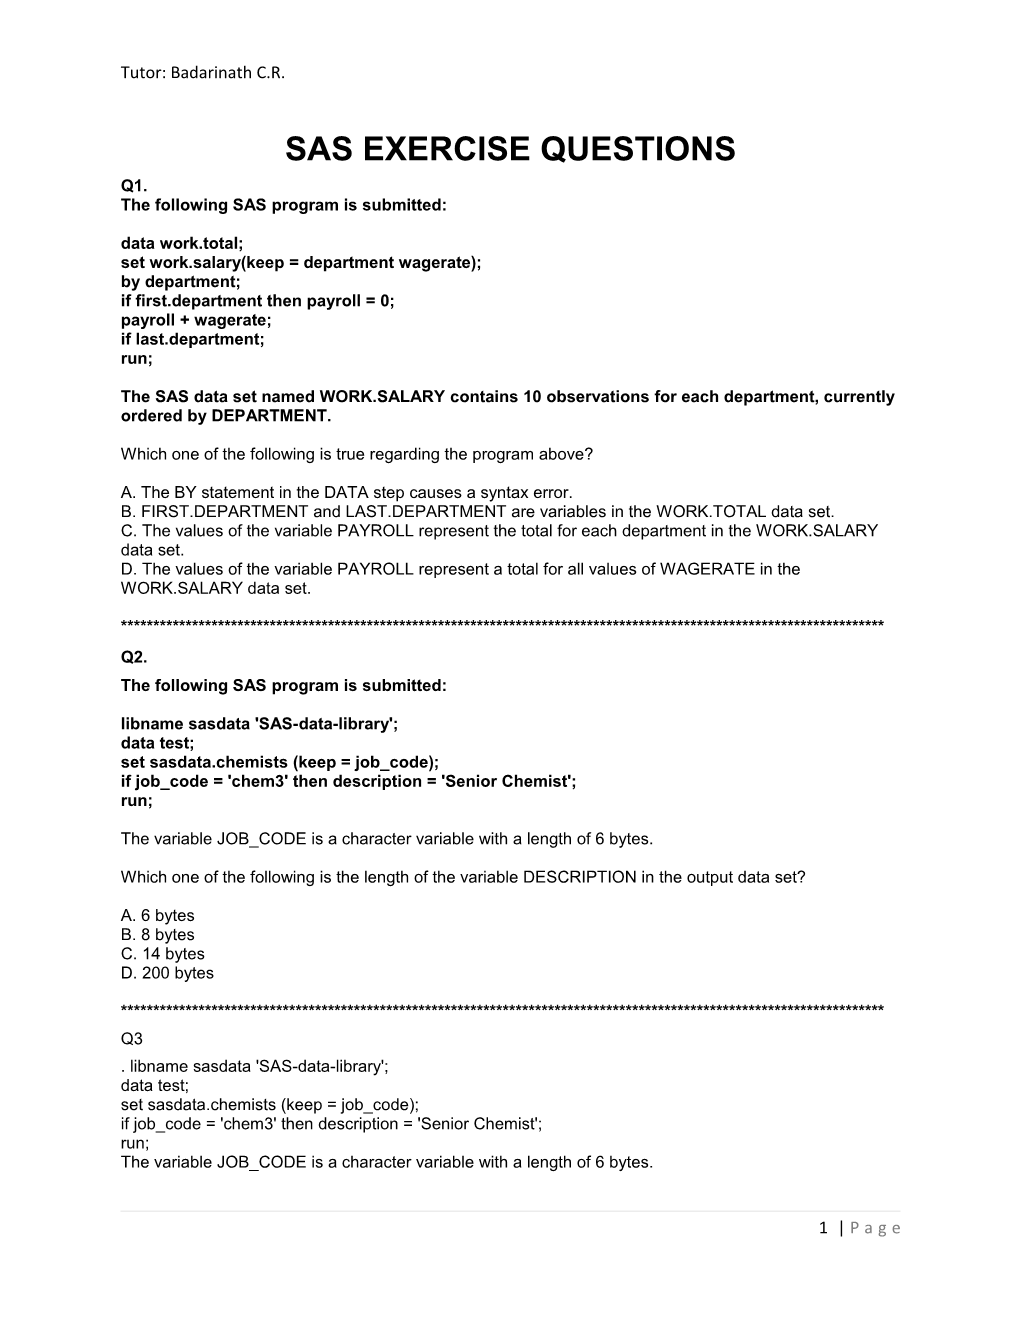 Sas Exercise Questions